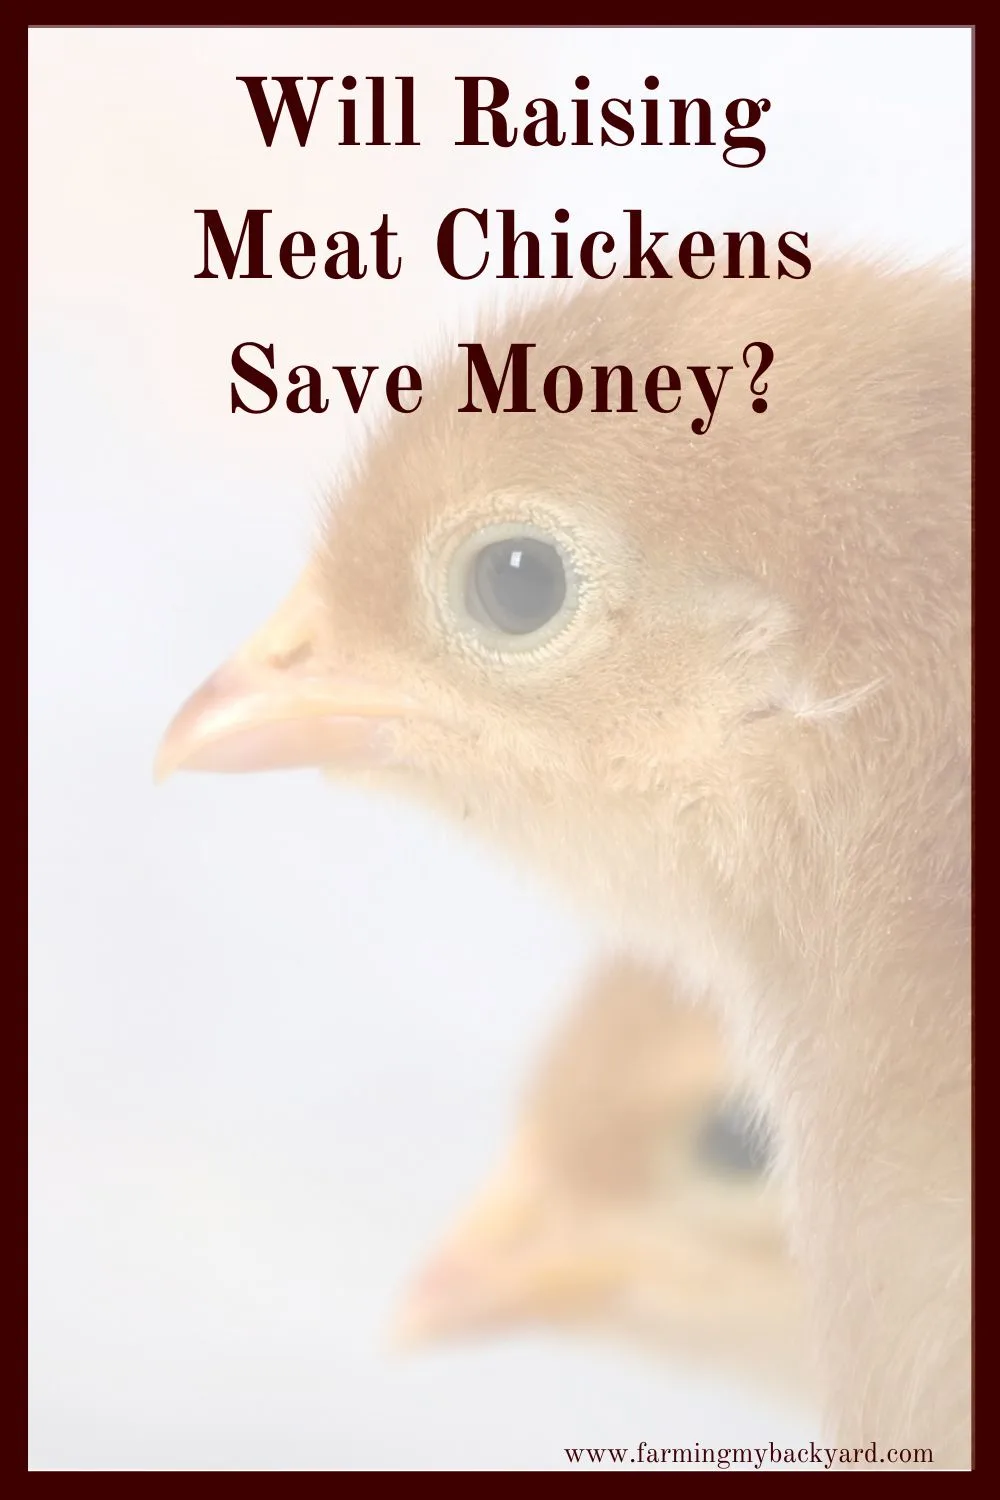 Doing it yourself is always cheaper, right?  Right? So, will raising meat chickens save money? Continue reading to find out!